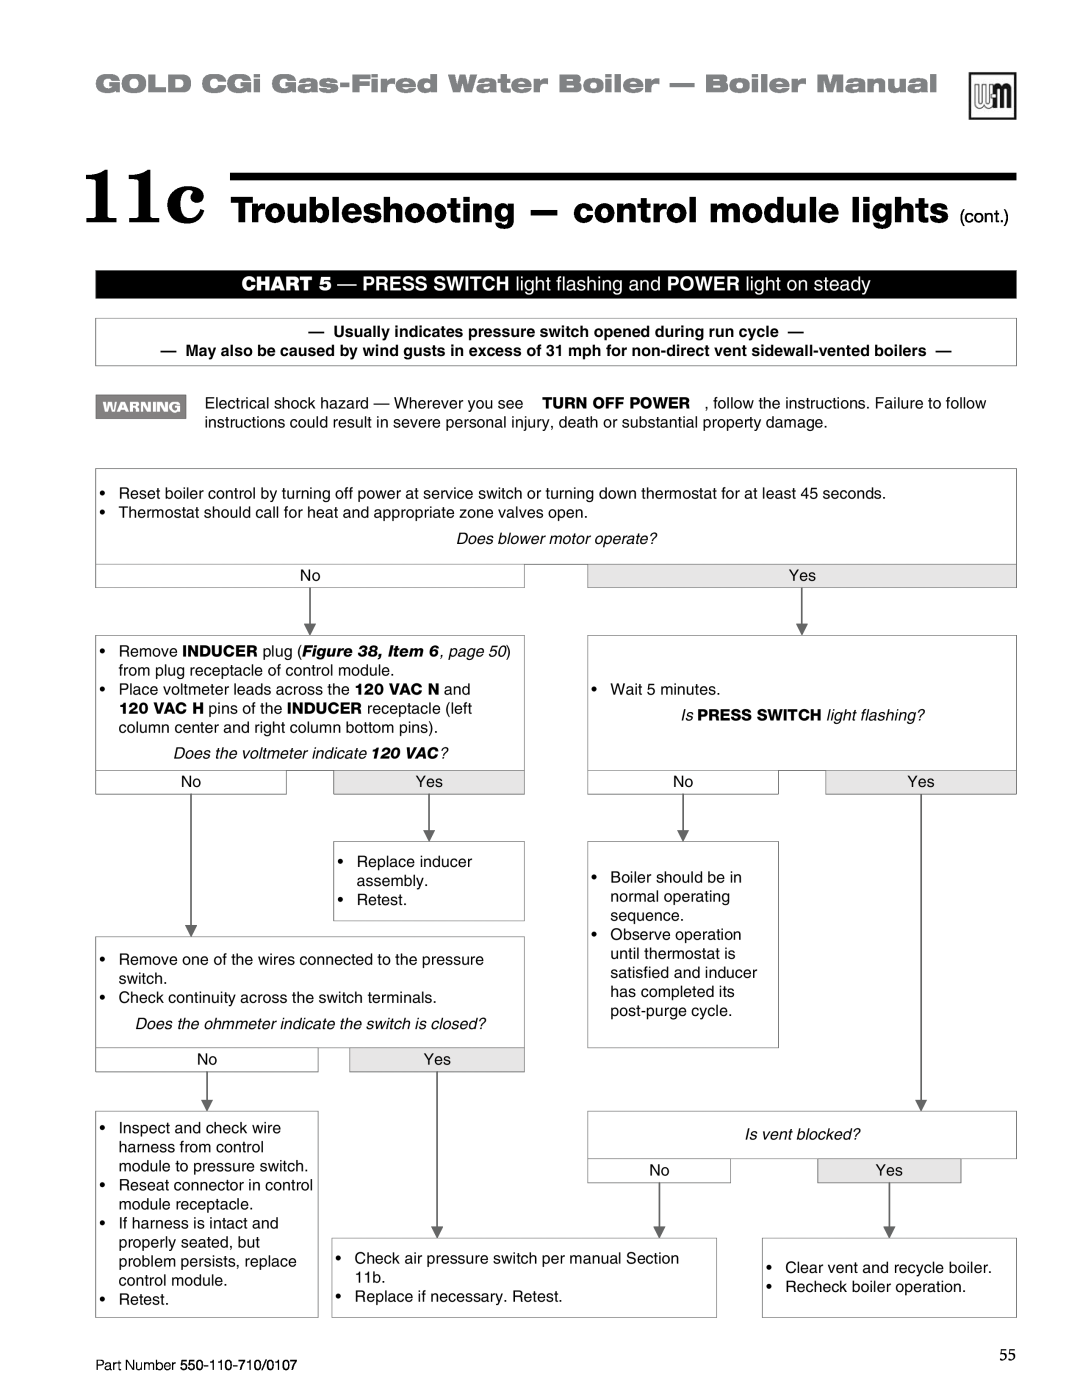 Weil-McLain 550-110-710/0107 manual 11c Troubleshooting - control module lights cont, Does blower motor operate? 